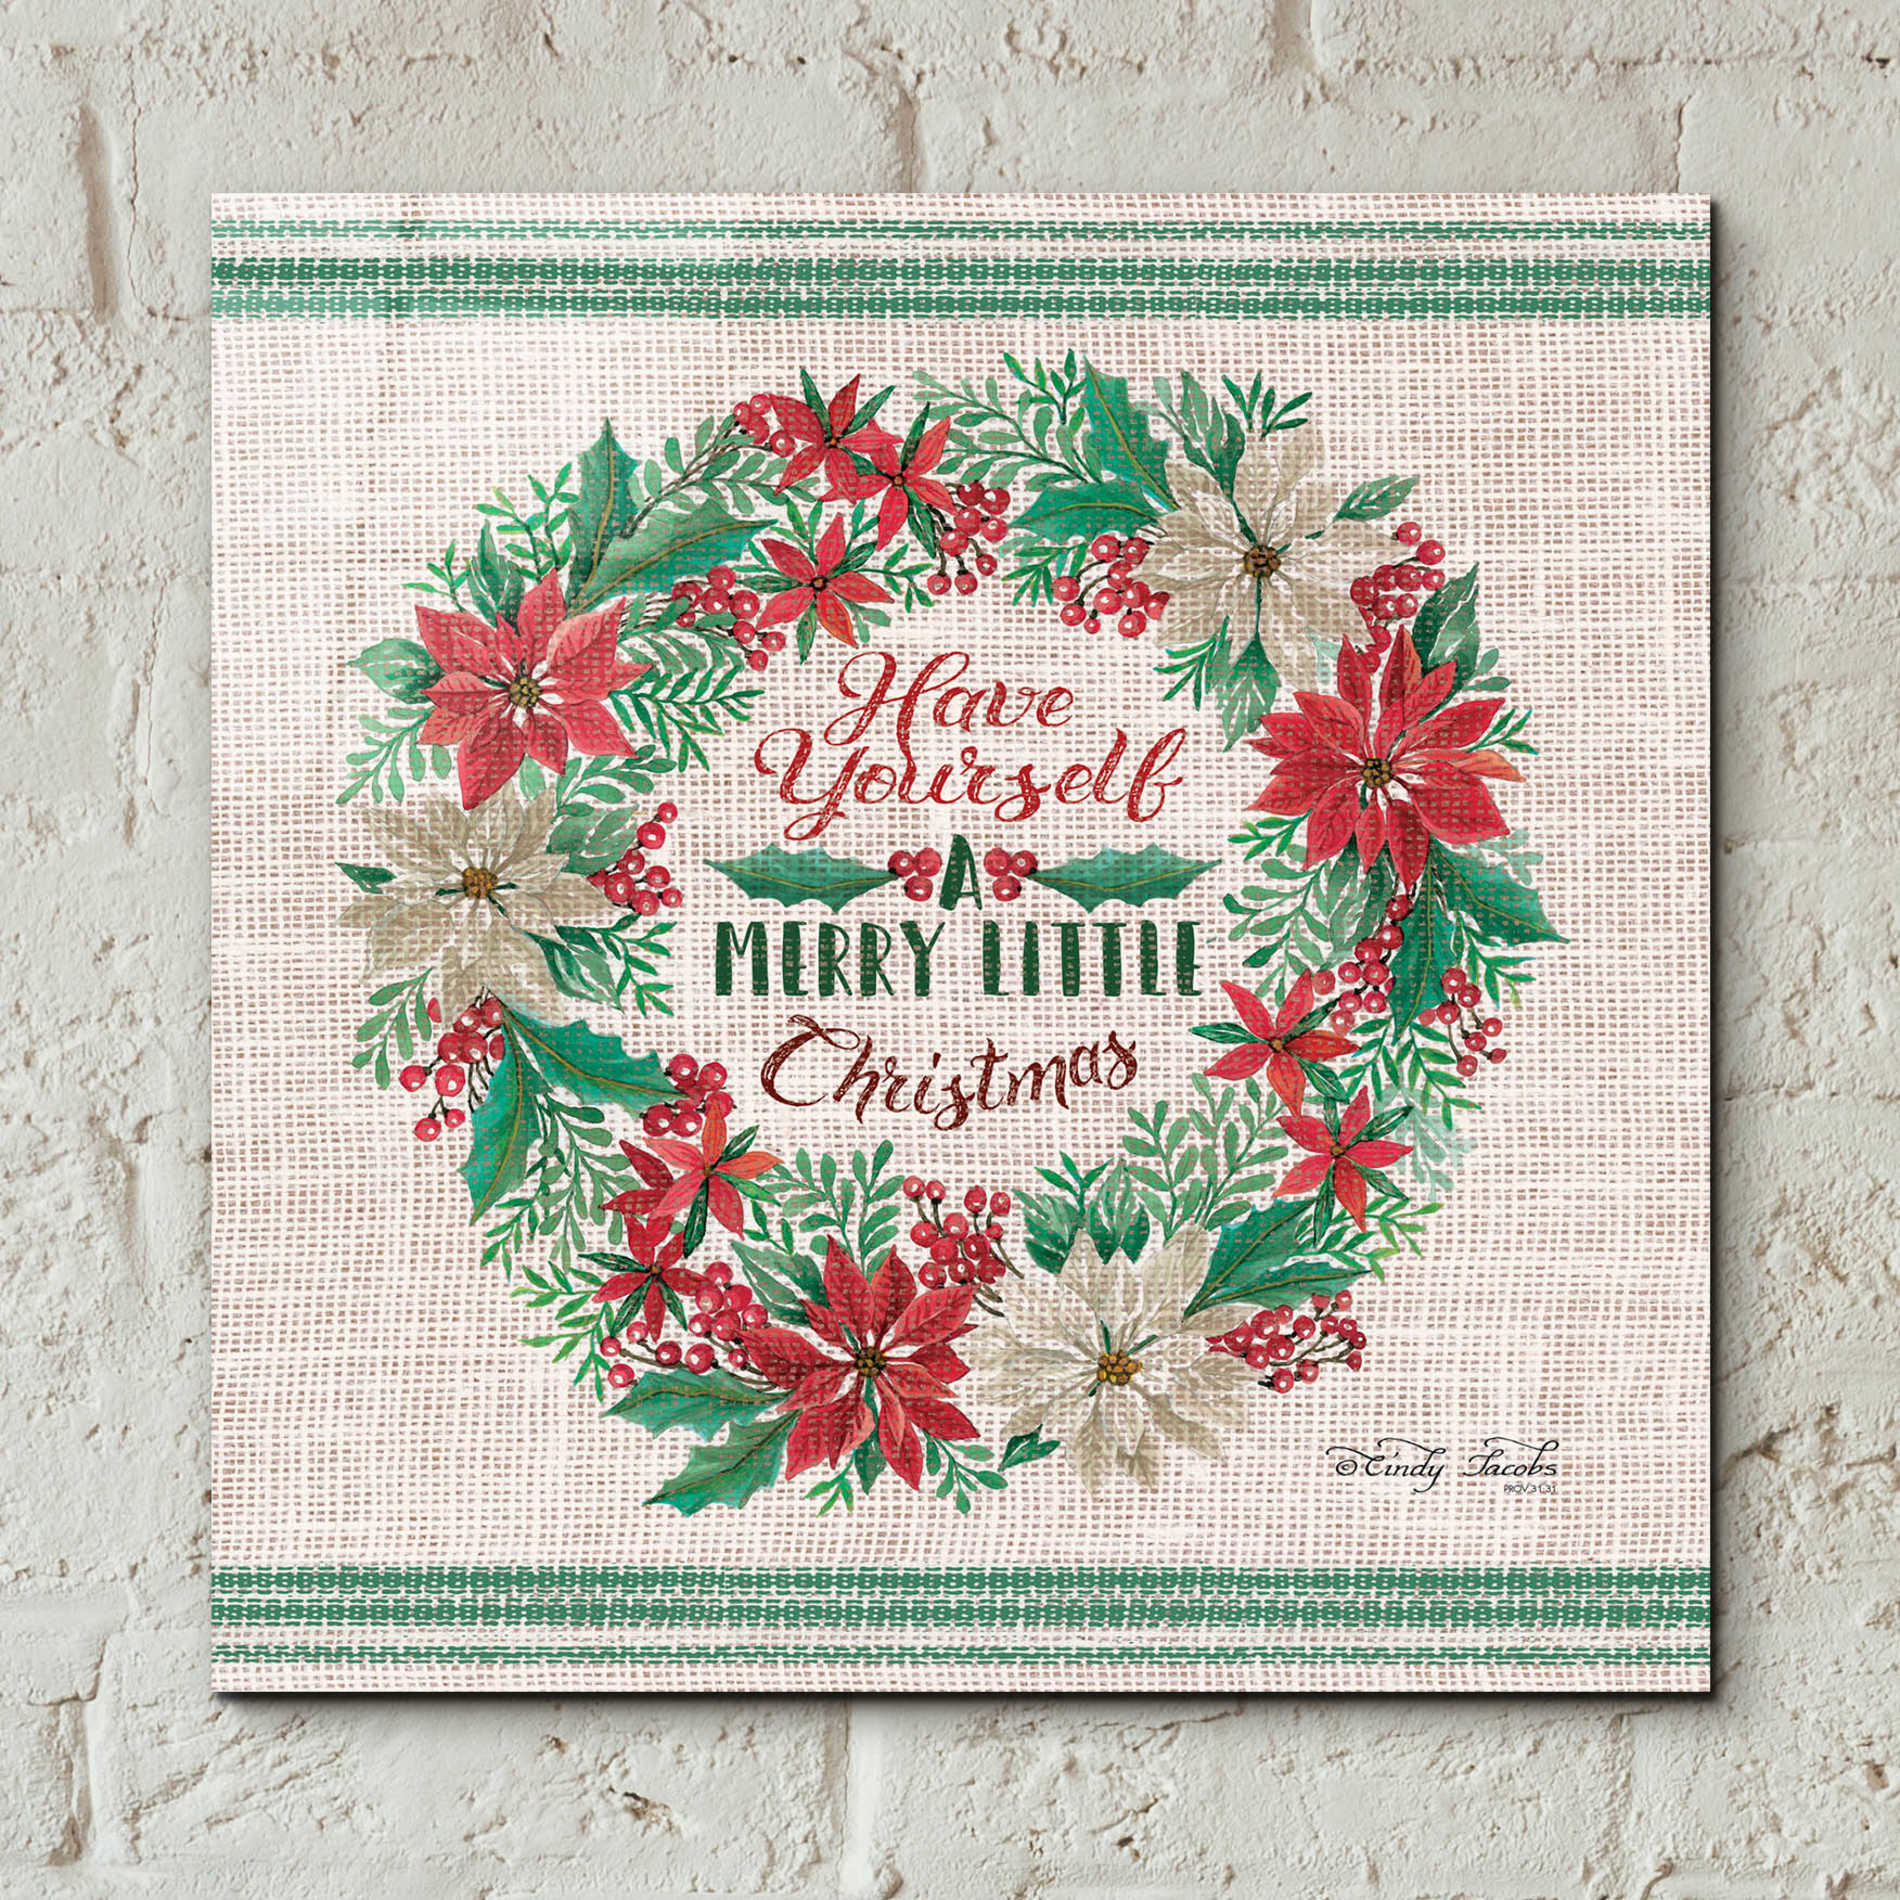 Epic Art 'Have Yourself a Merry Little Christmas Embroidery' by Cindy Jacobs, Acrylic Glass Wall Art,12x12